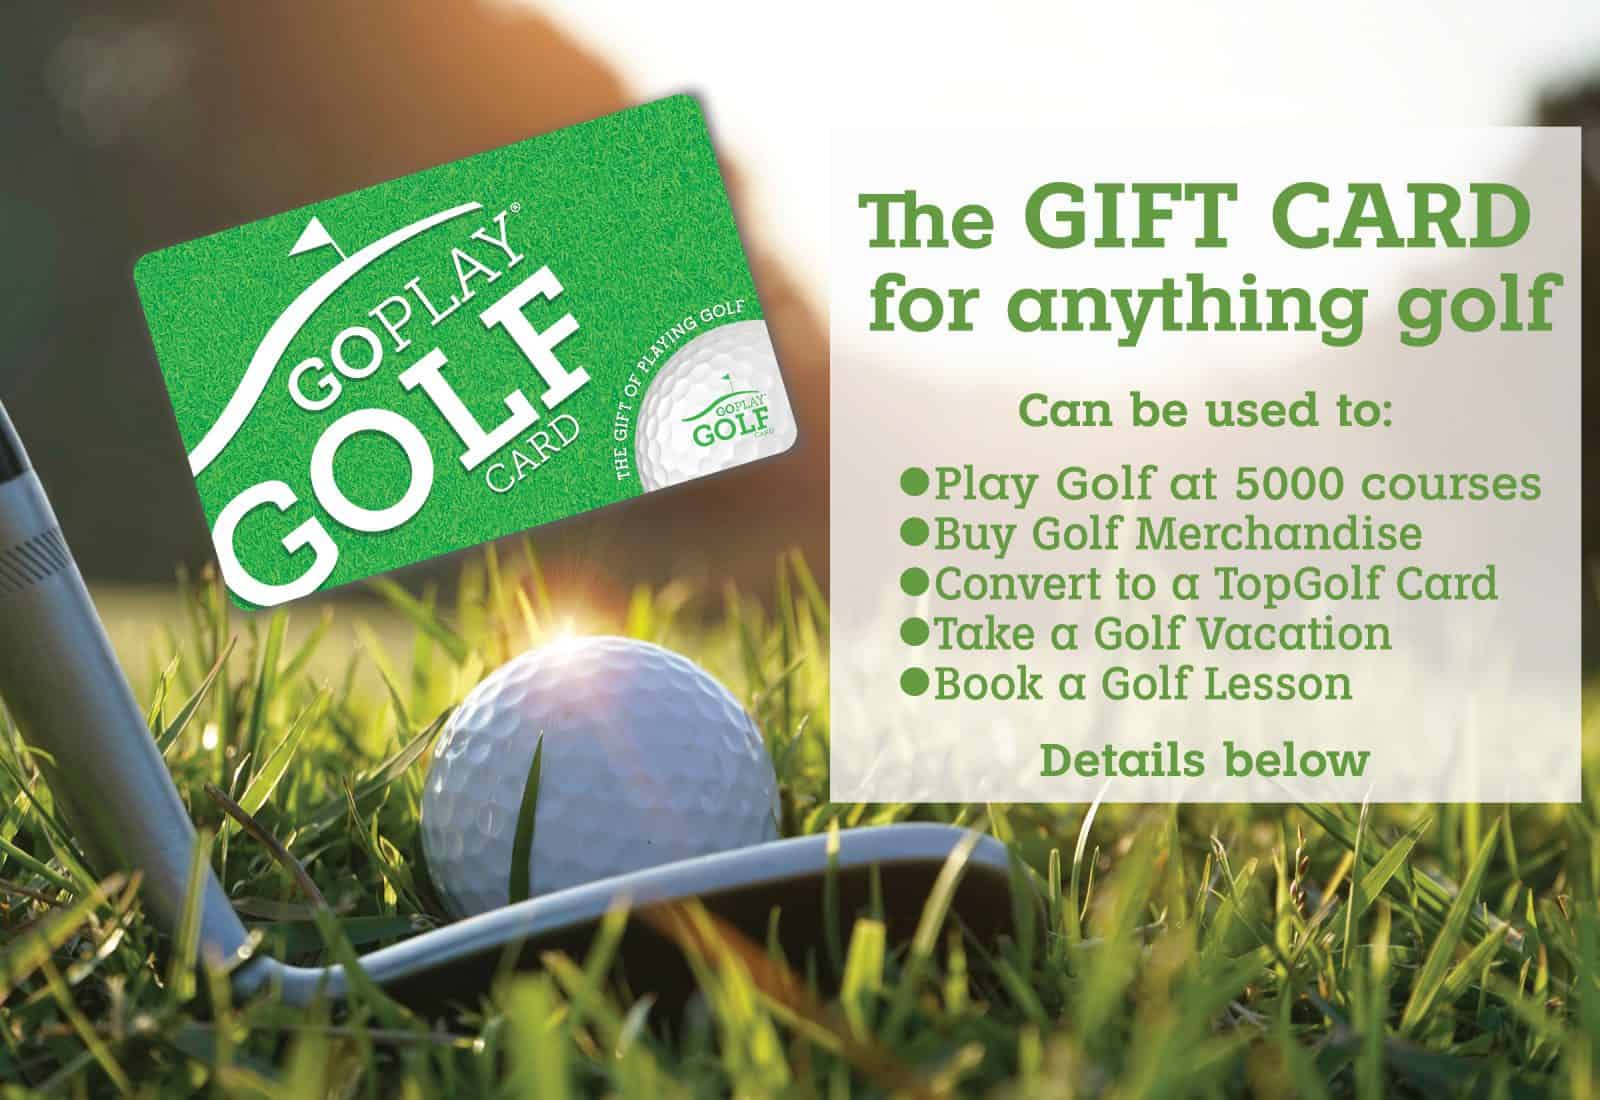 May The Course Be With You Golf Gift Box For Men